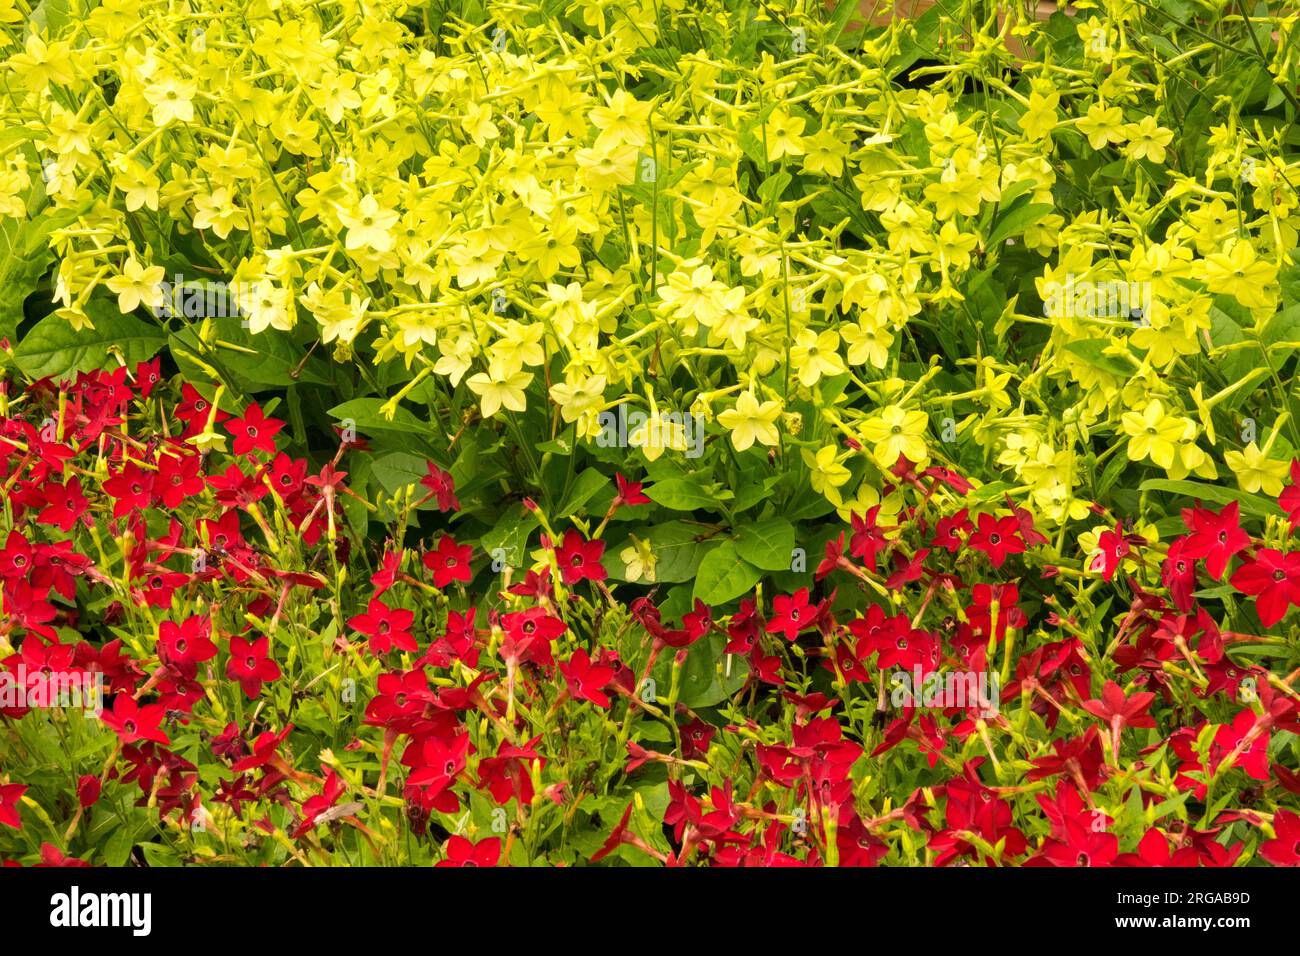 Flowers Nicotiana alata 'Lime Green' and Nicotiana alata 'Saratoga Red' bedding red yellow Flowering Tobacco in garden Stock Photo